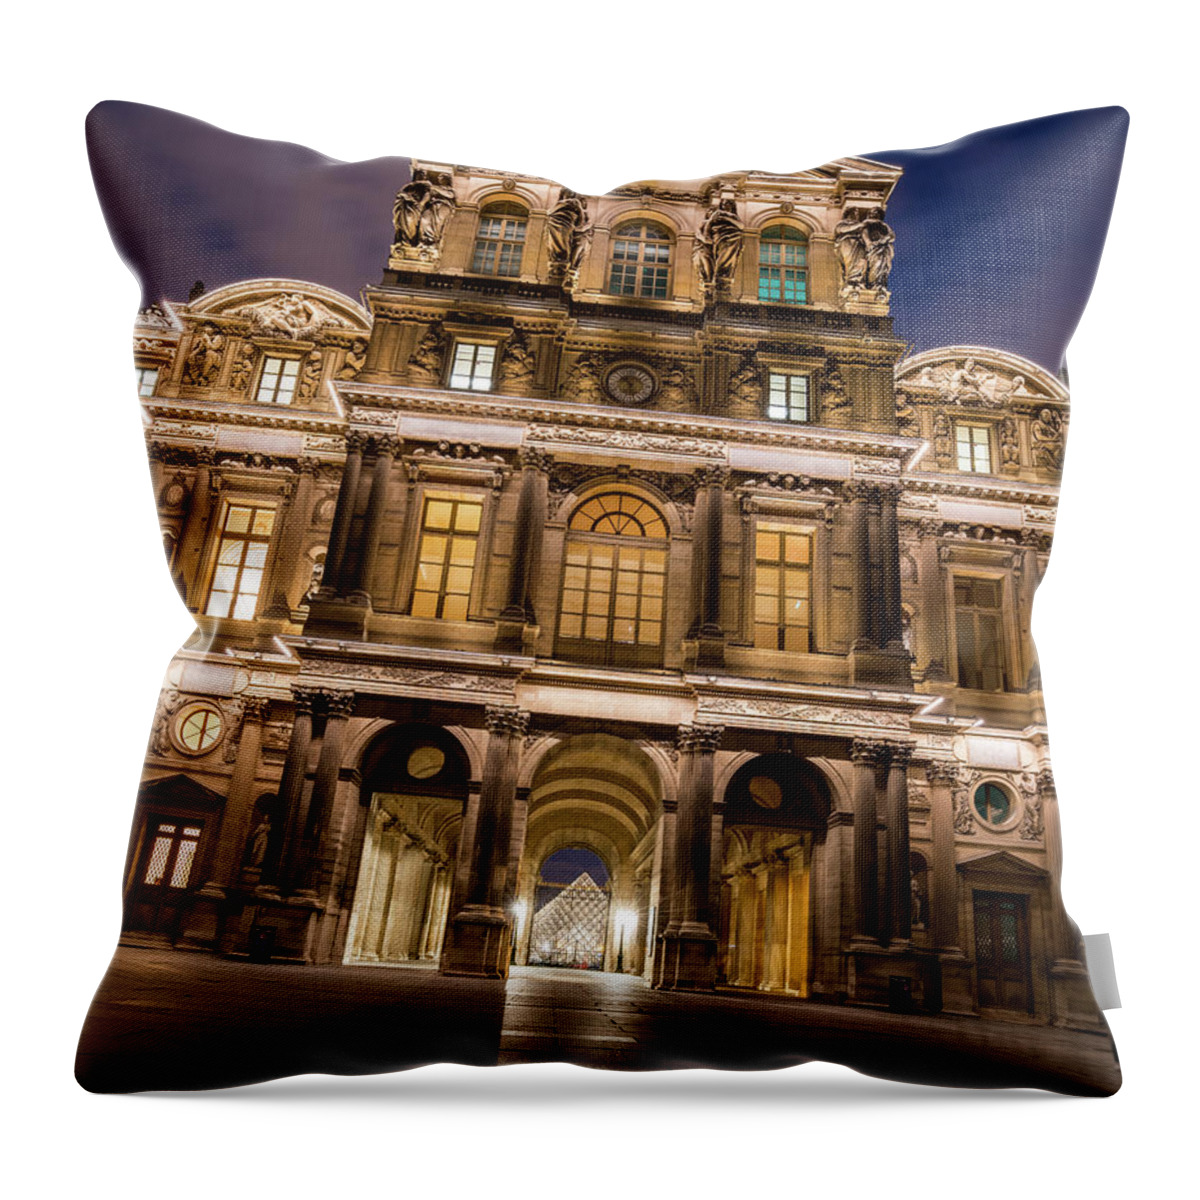 Paris Throw Pillow featuring the photograph The Louvre Museum at Night by James Udall